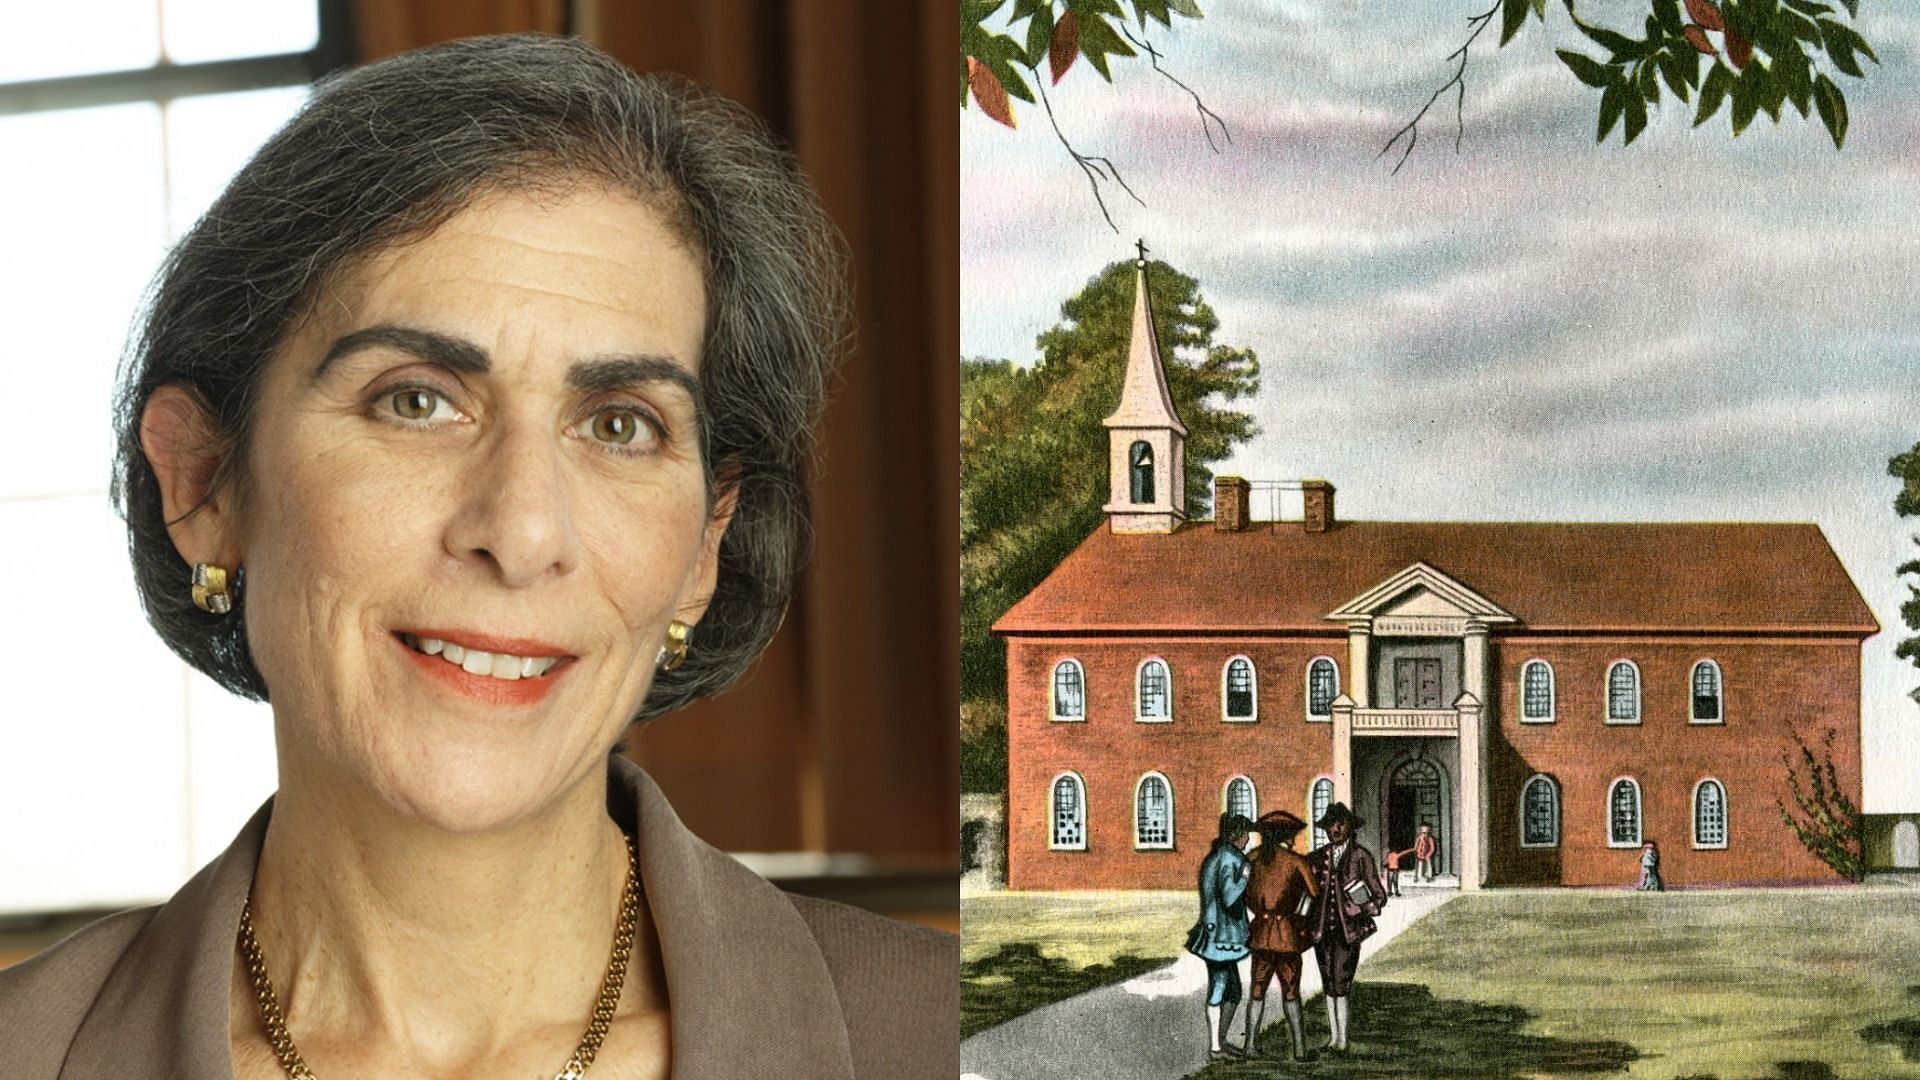 University of Pennsylvania law professor Amy Wax made controversial about Indian immigrants and African-Americans (Image via University of Pennsylvania and Getty Images)